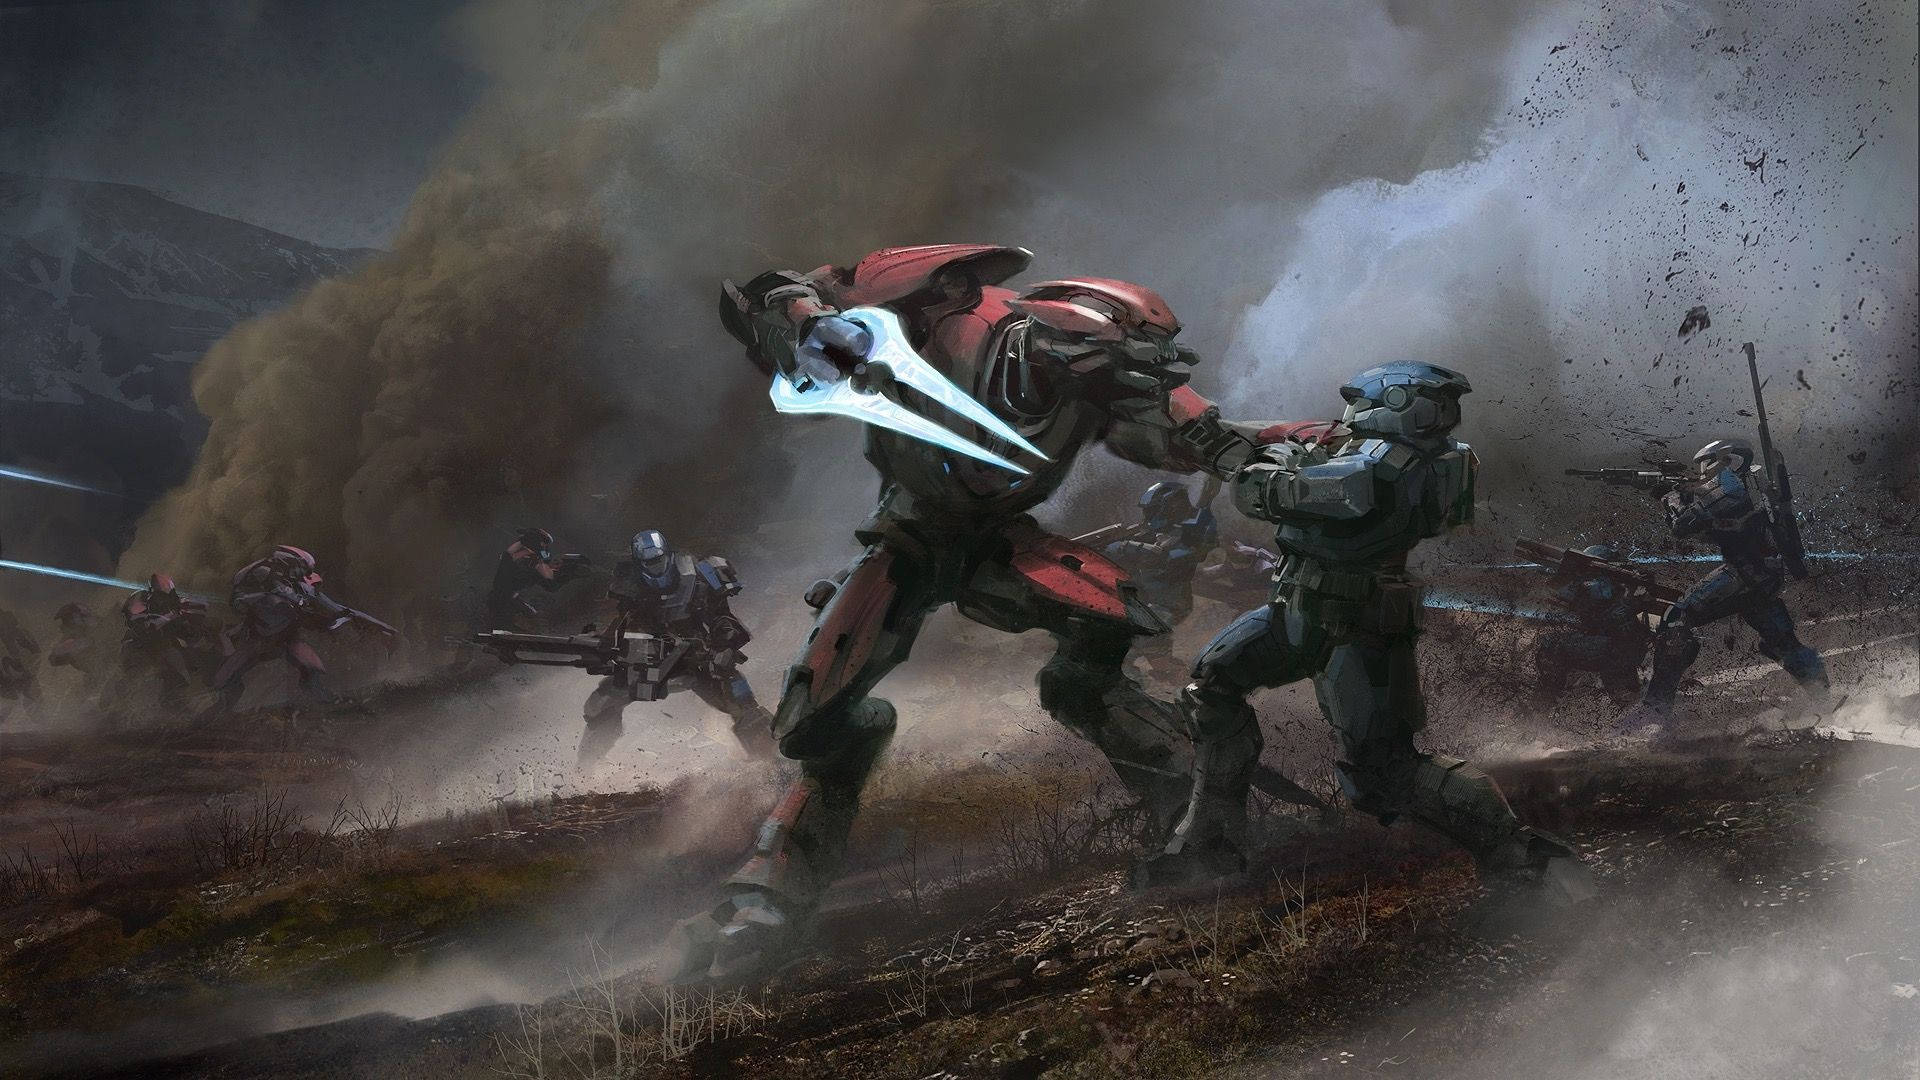 The legendary battle between the Elite and the Spartan in the Halo Reach universe Wallpaper